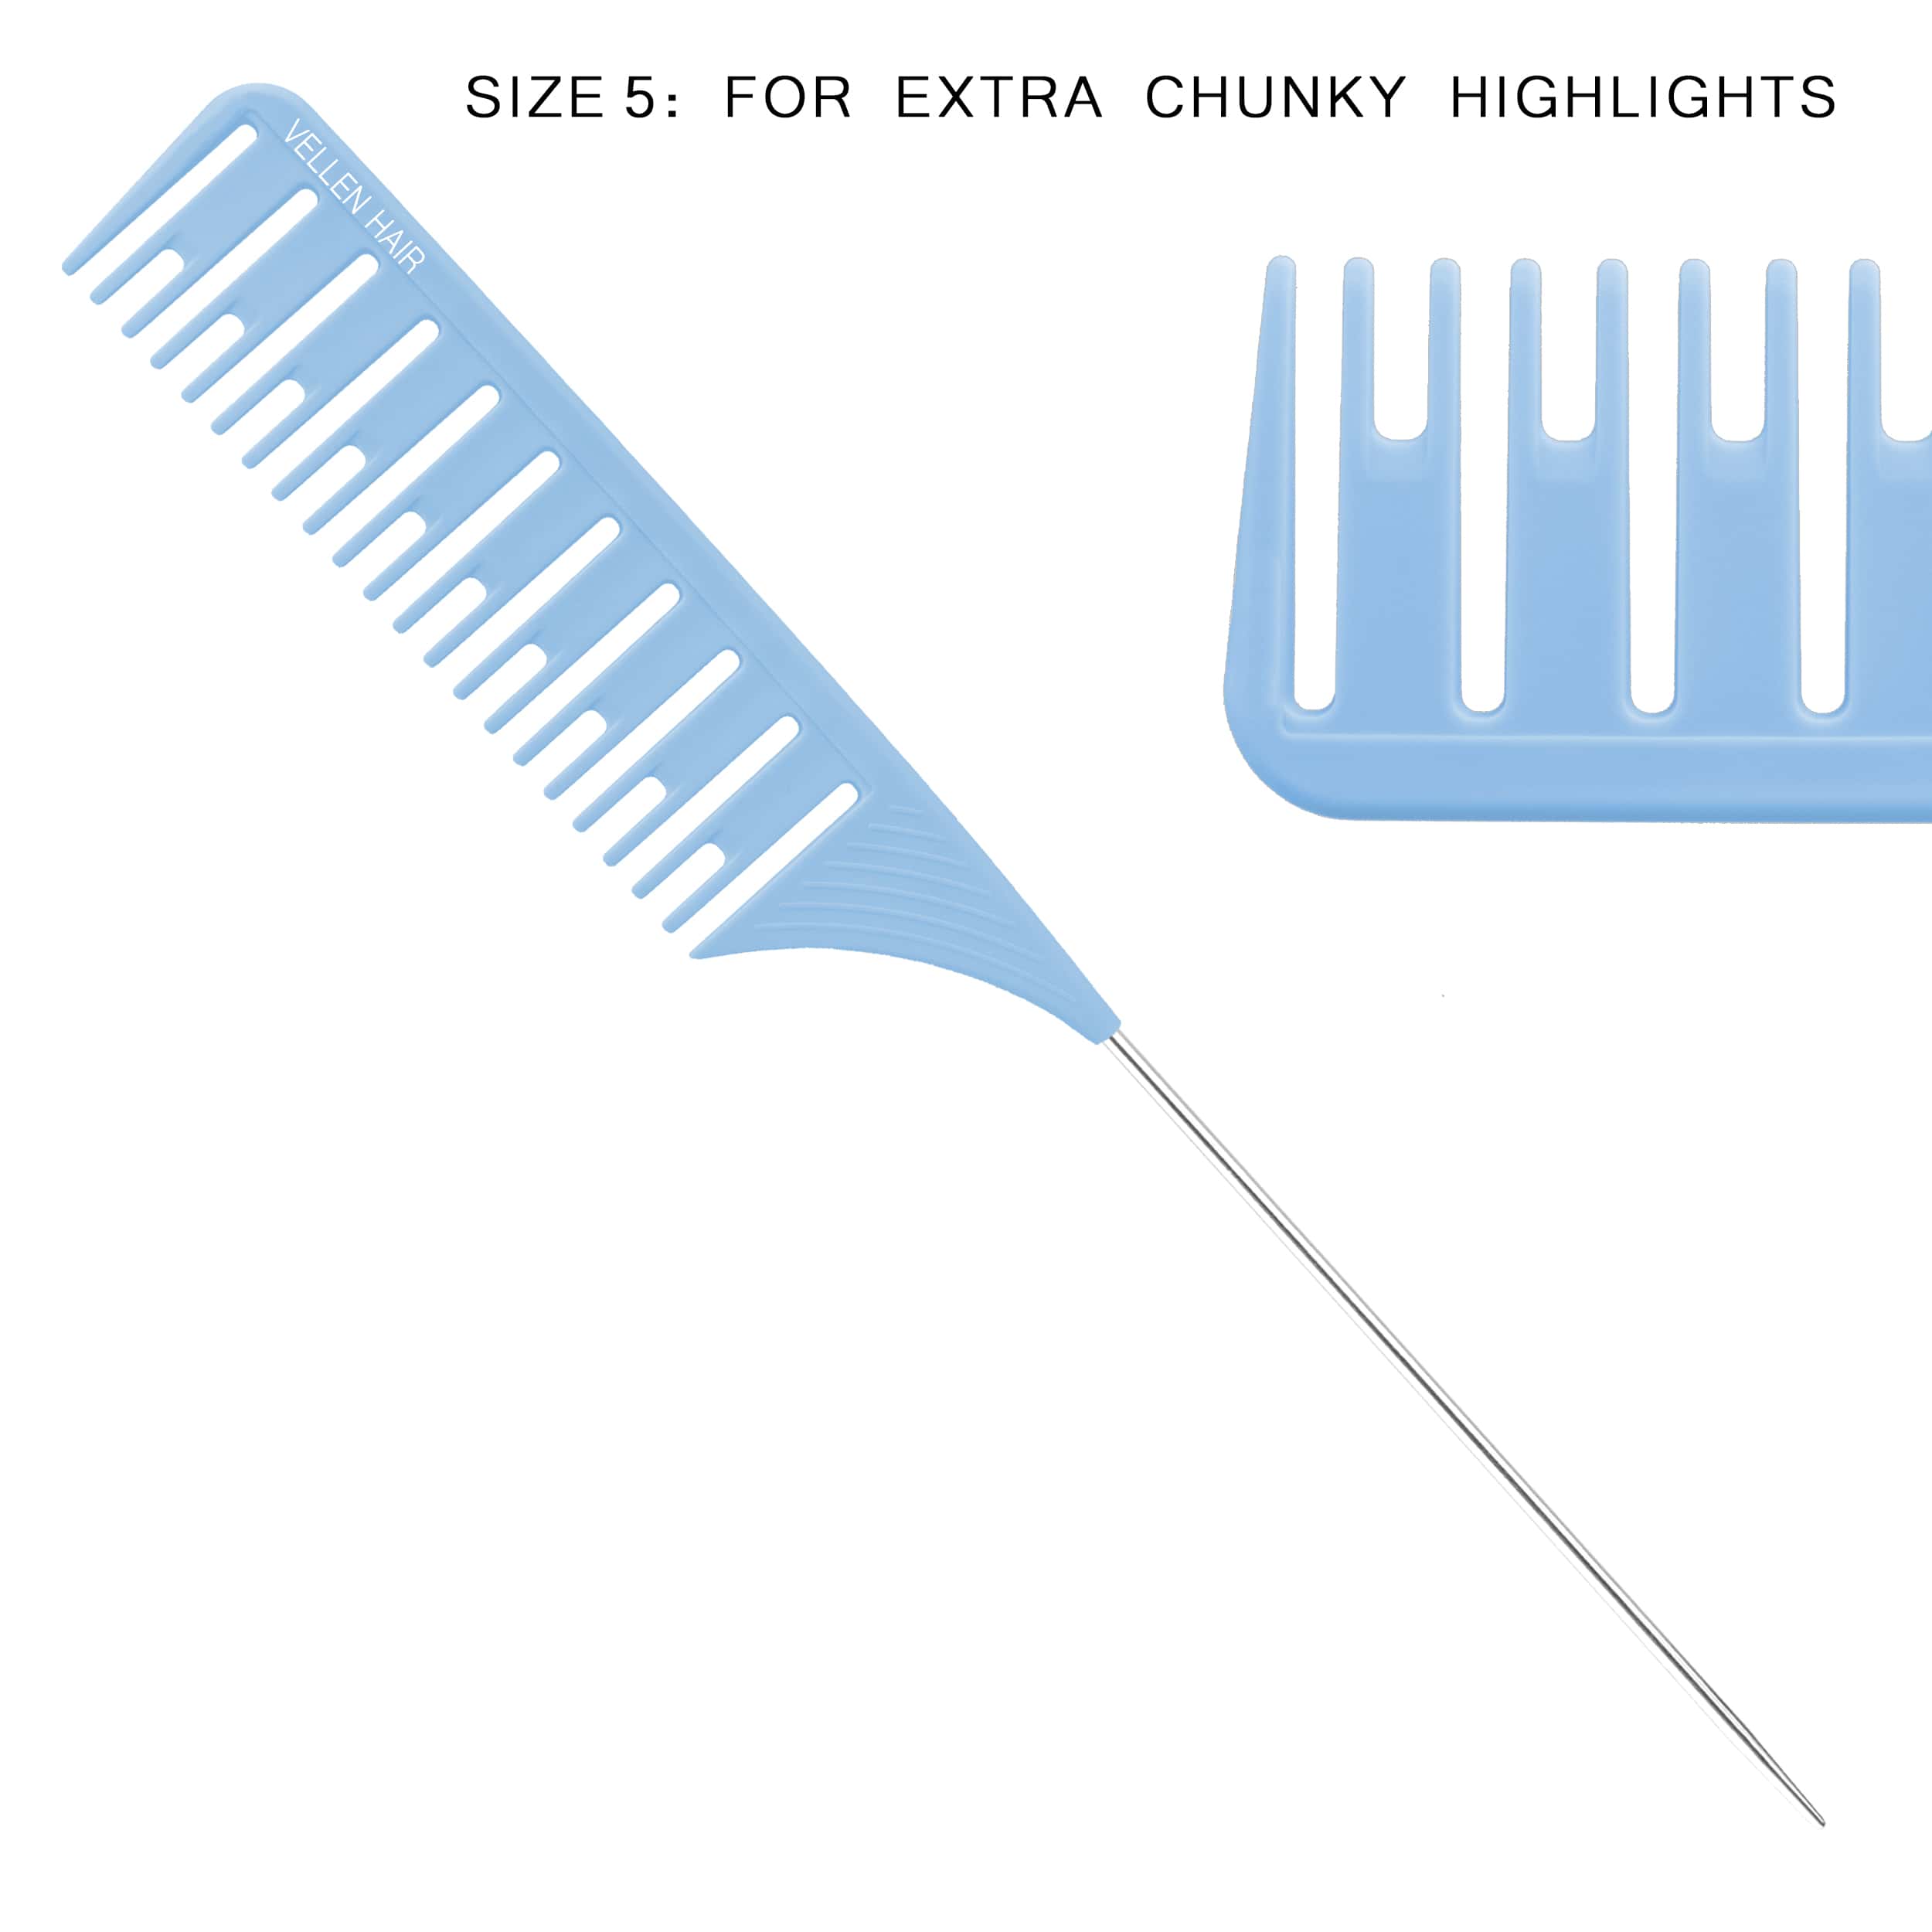 Highlighting Comb Set 1.0 - 5 Sizes - Cerulean